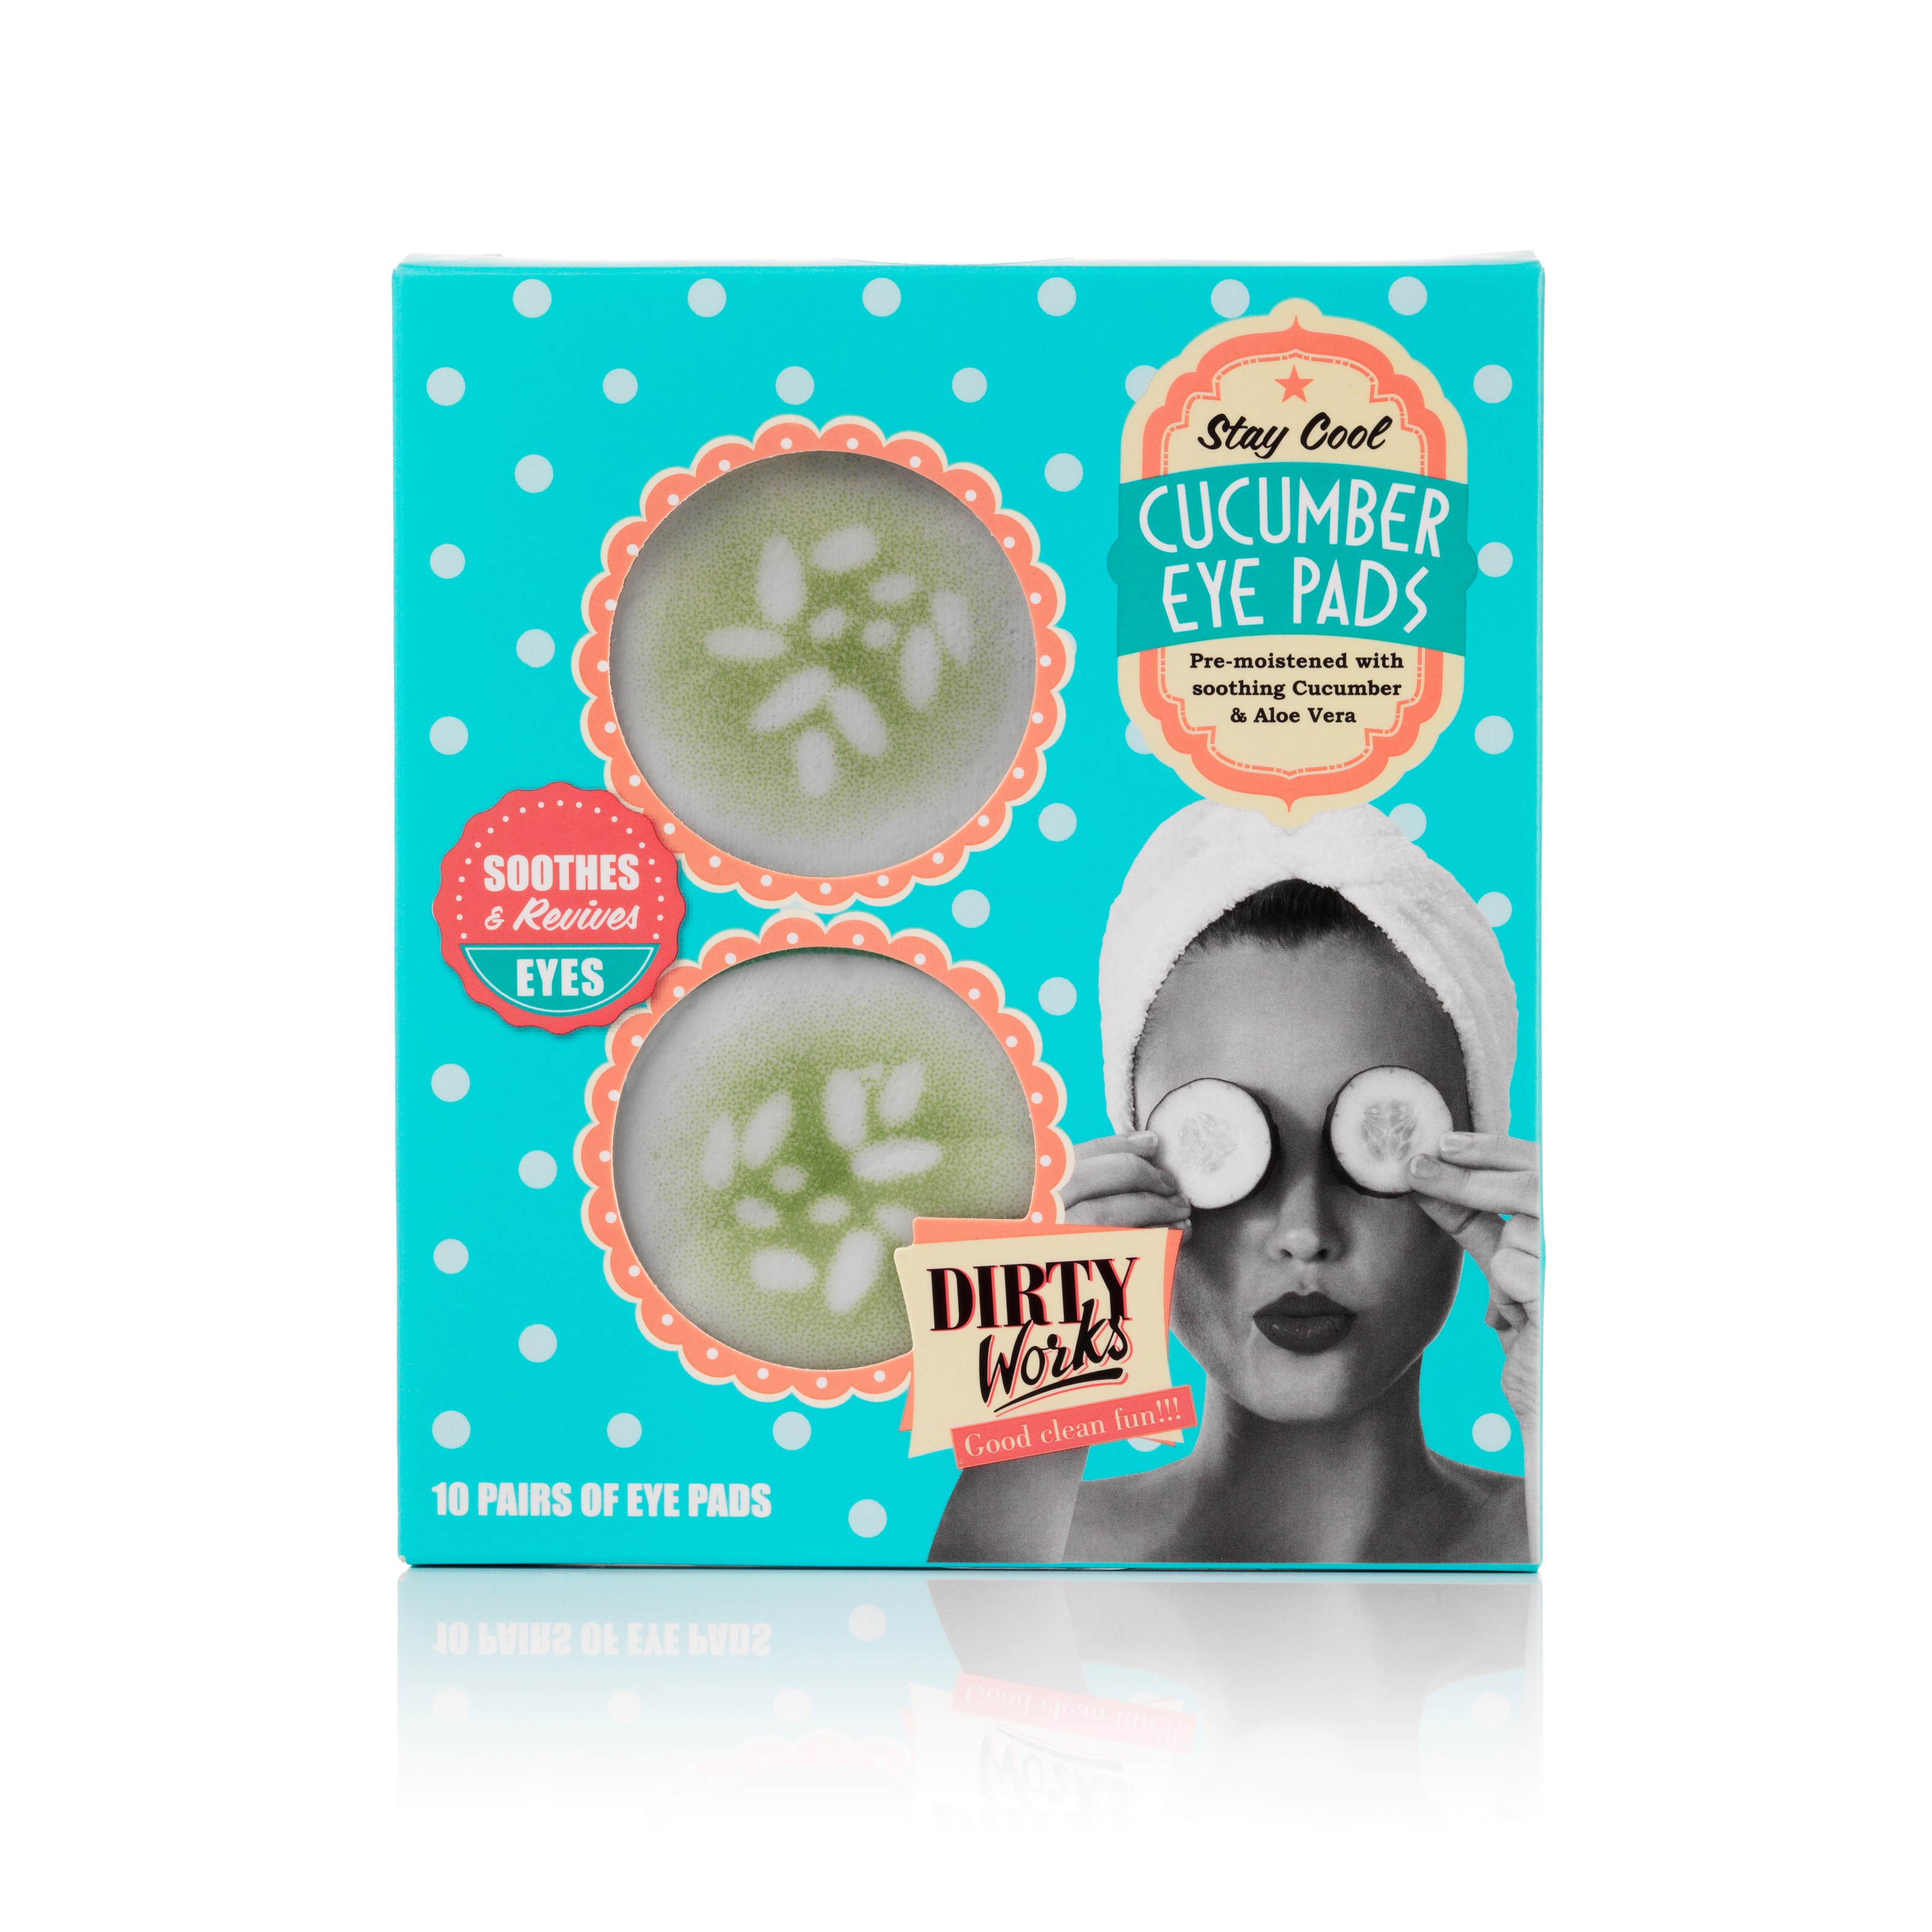 Dirty Works Stay Cool Cucumber Eye Pads